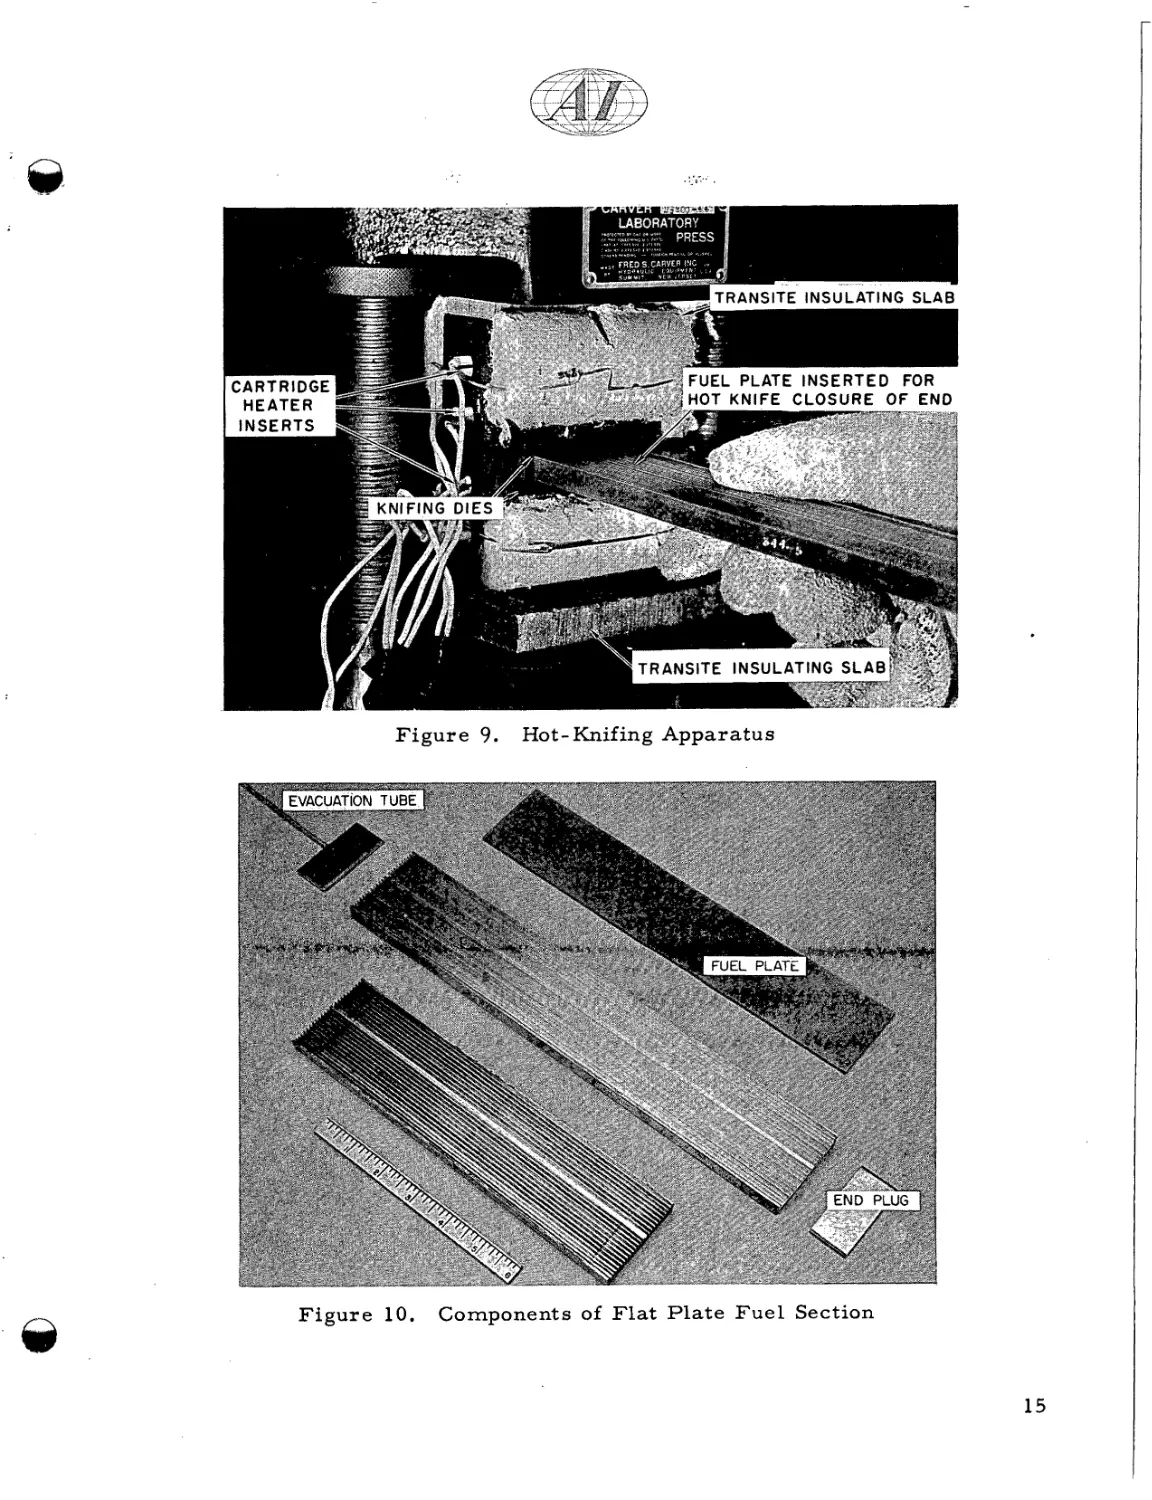 Hot-Knifing Apparatus
components of Flat Plate Fuel Section 7500-5112A).